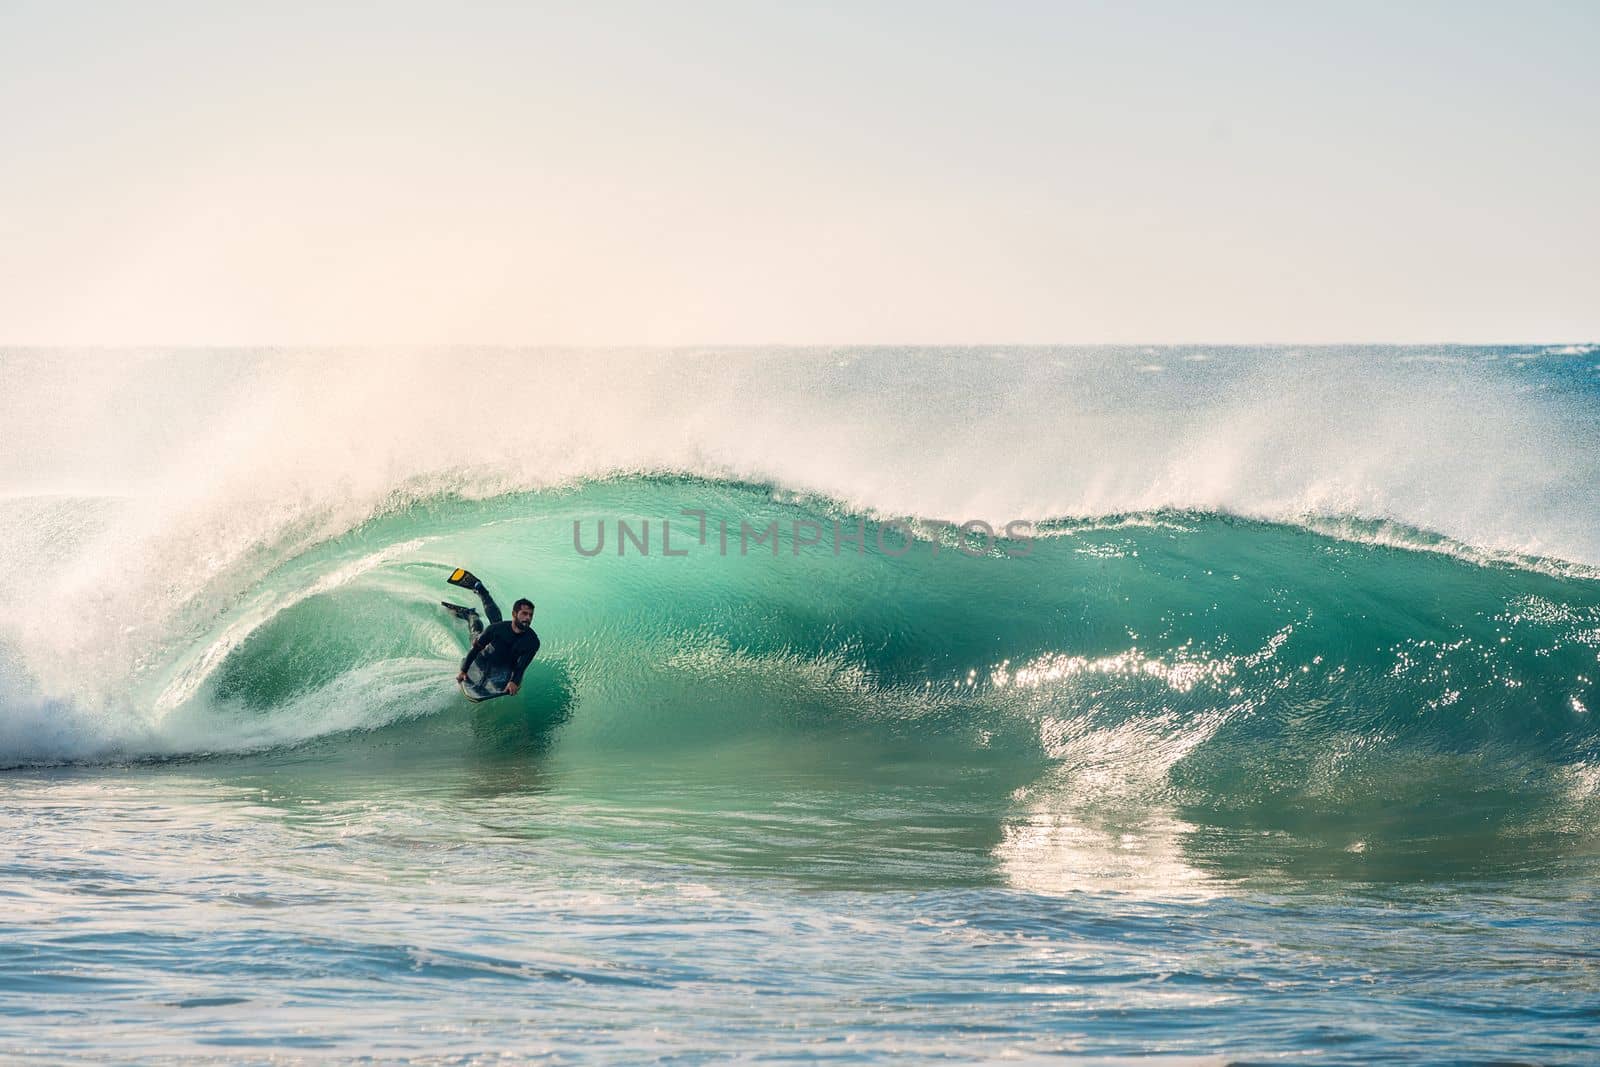 man surfing rides in the barrel of a beautiful wave that breaks with energy and power, sunlight reflects golden on the turquoise surface of the sea and in the foam, the wind rises columns of water